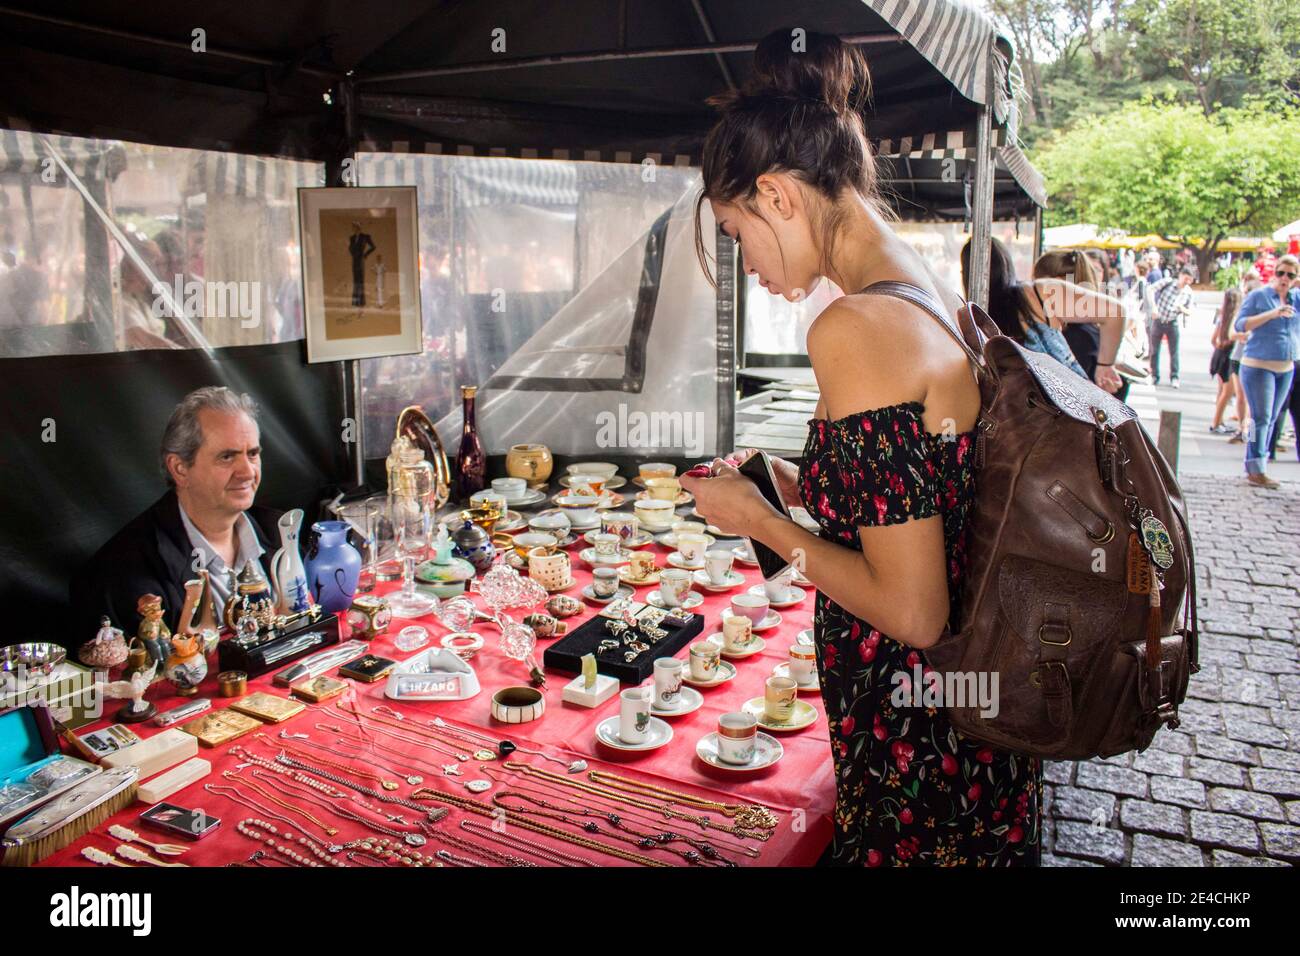 São Paulo / São Paulo / Brazil - 08 19 2018: Pretty model woman choosing a necklace to buy at a market place with the man seller watching. Stock Photo